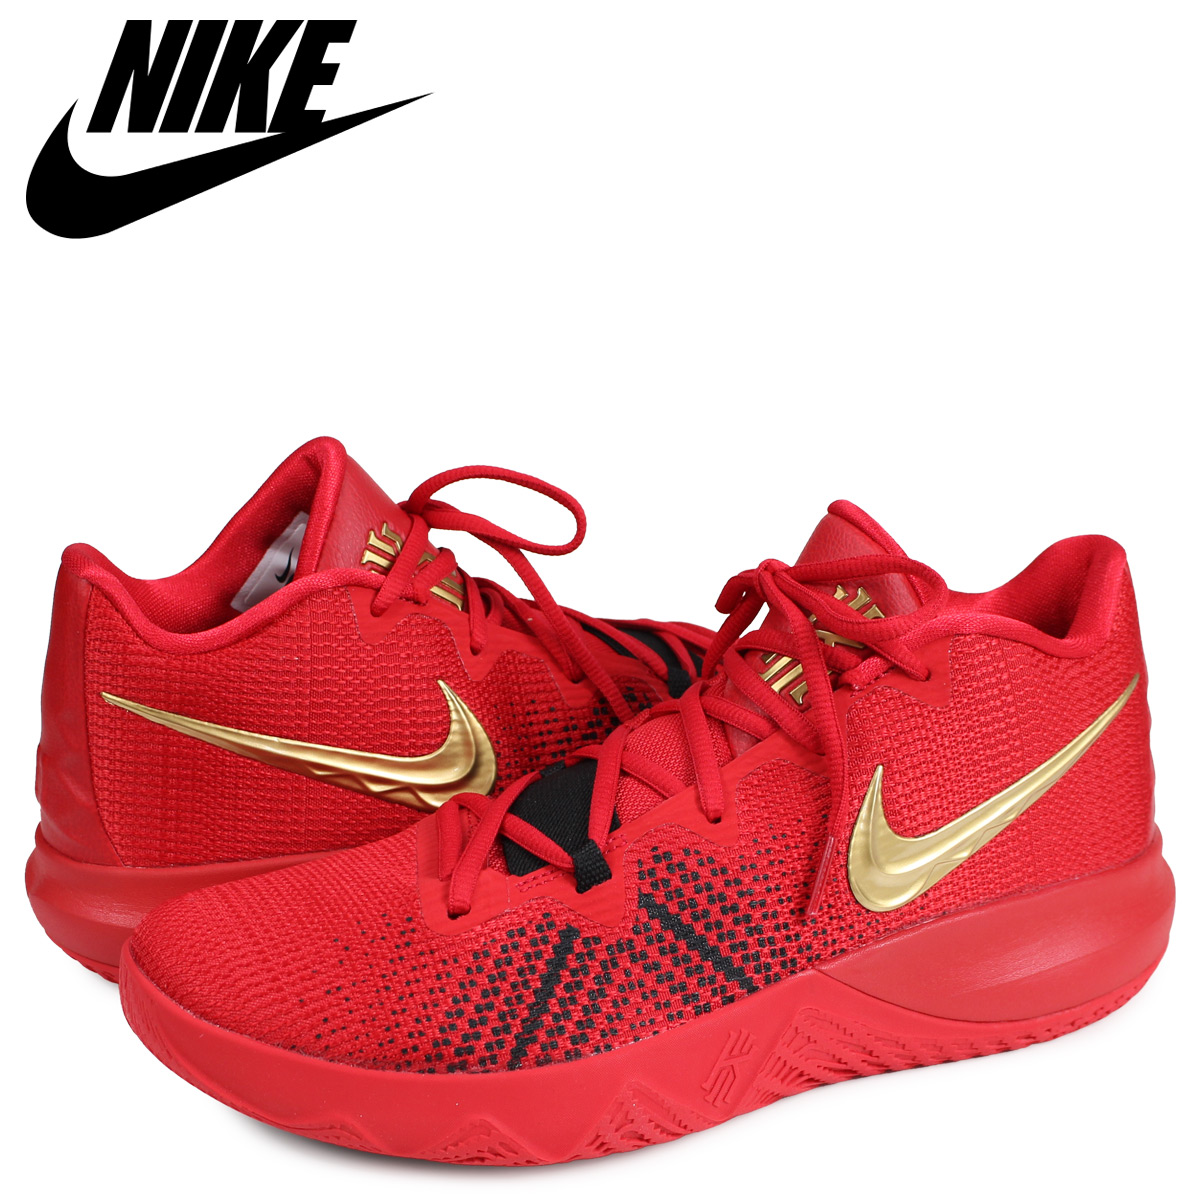 nike kyrie flytrap red & gold